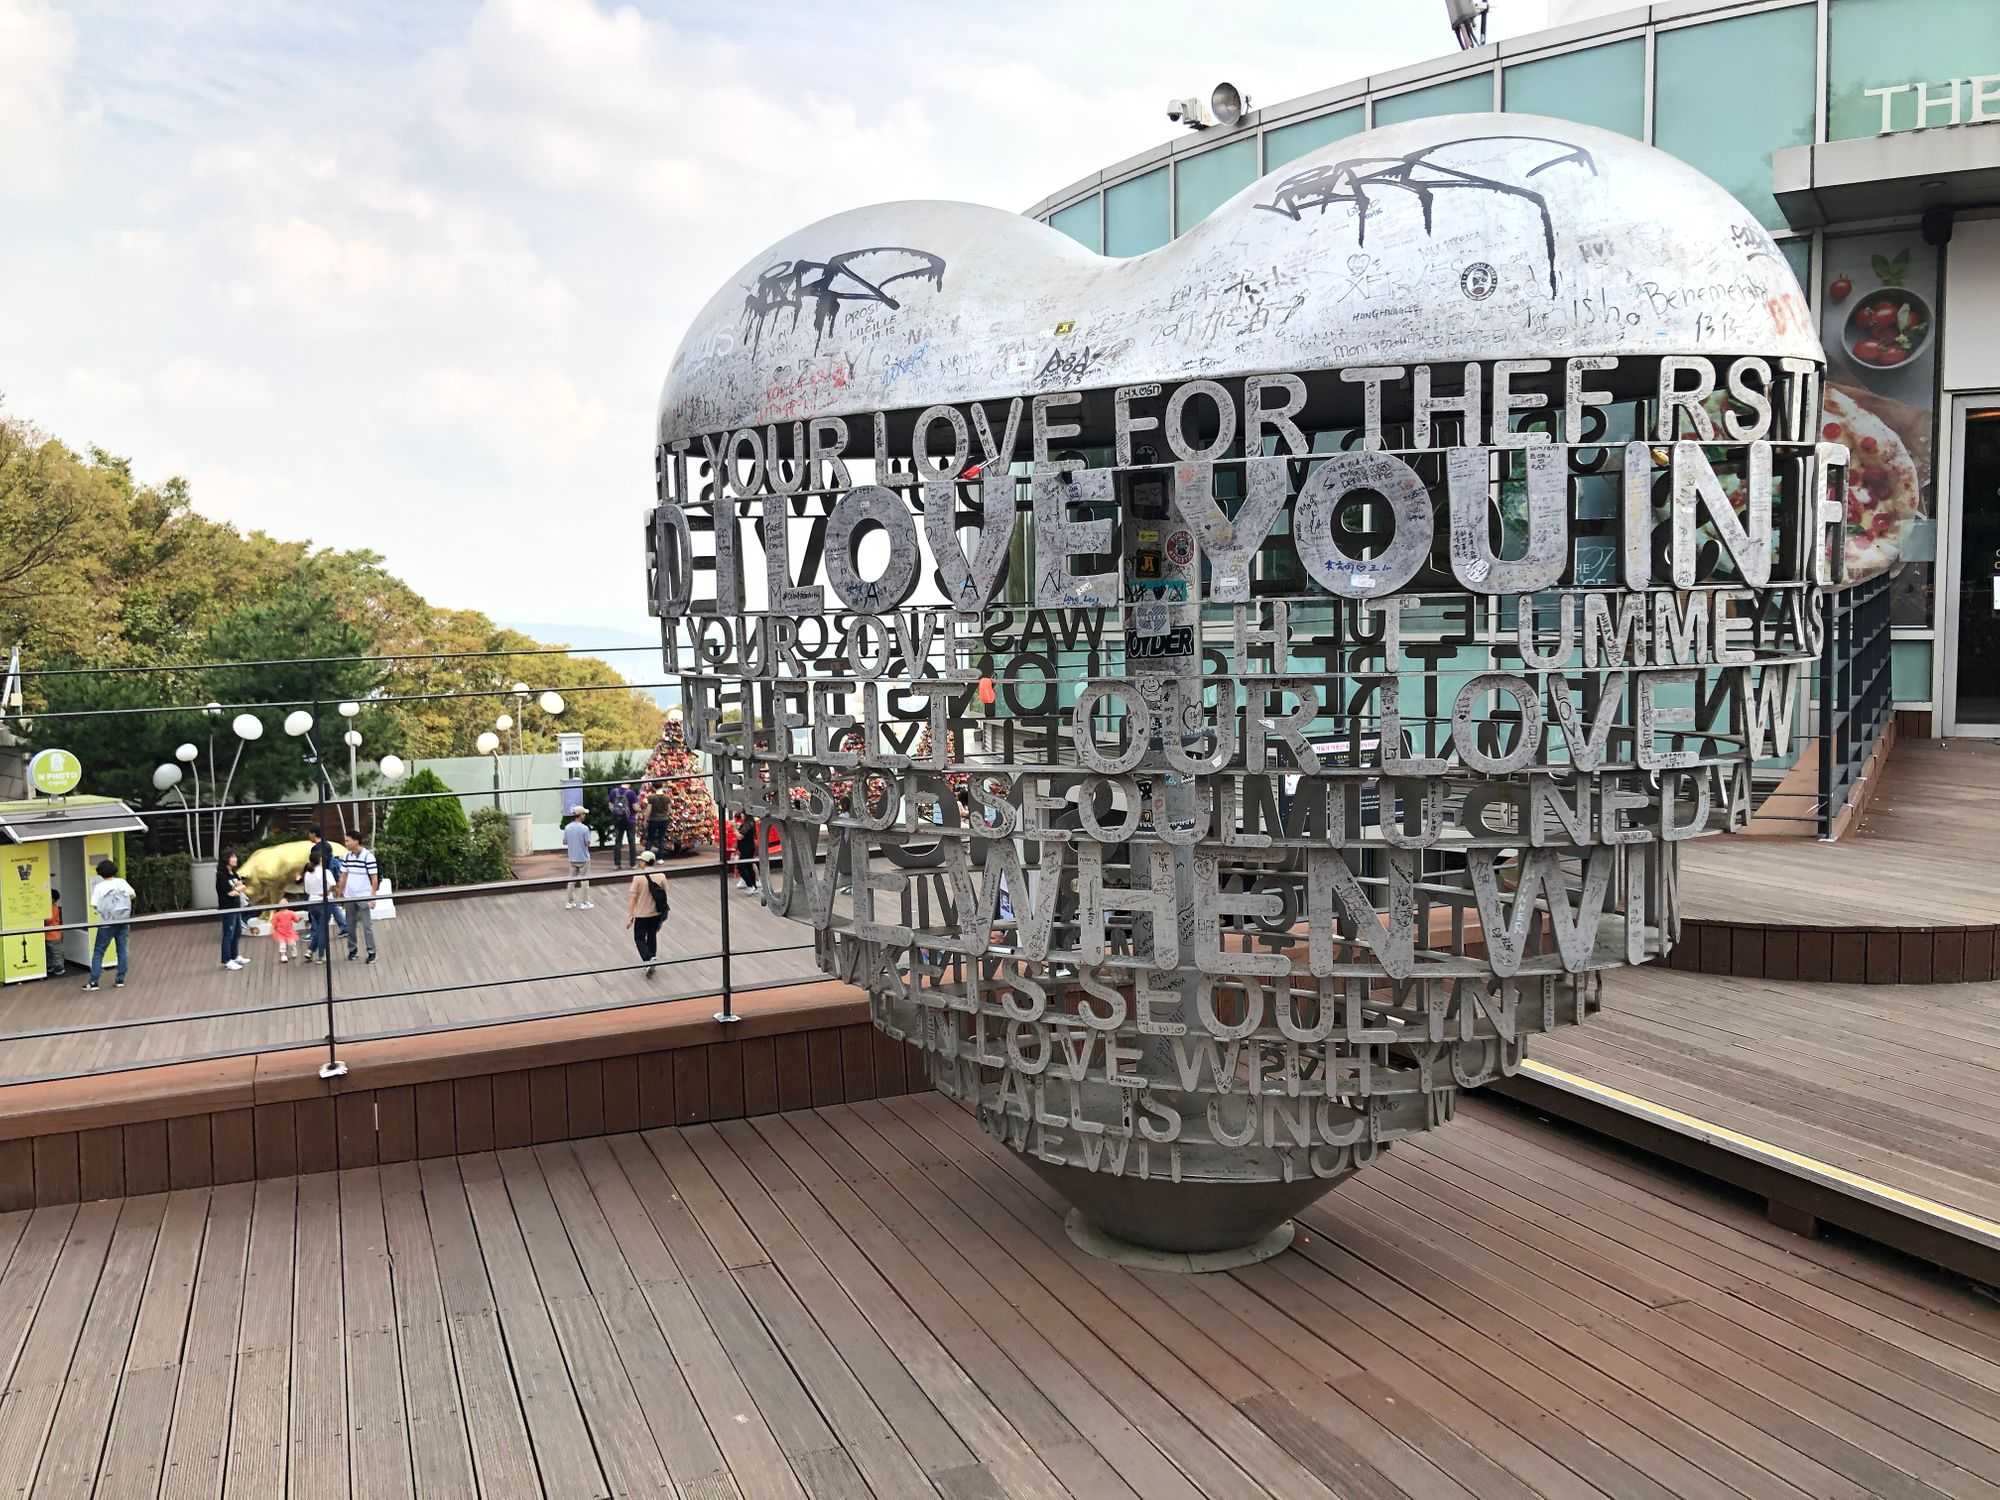 N Seoul Tower (Image by author)